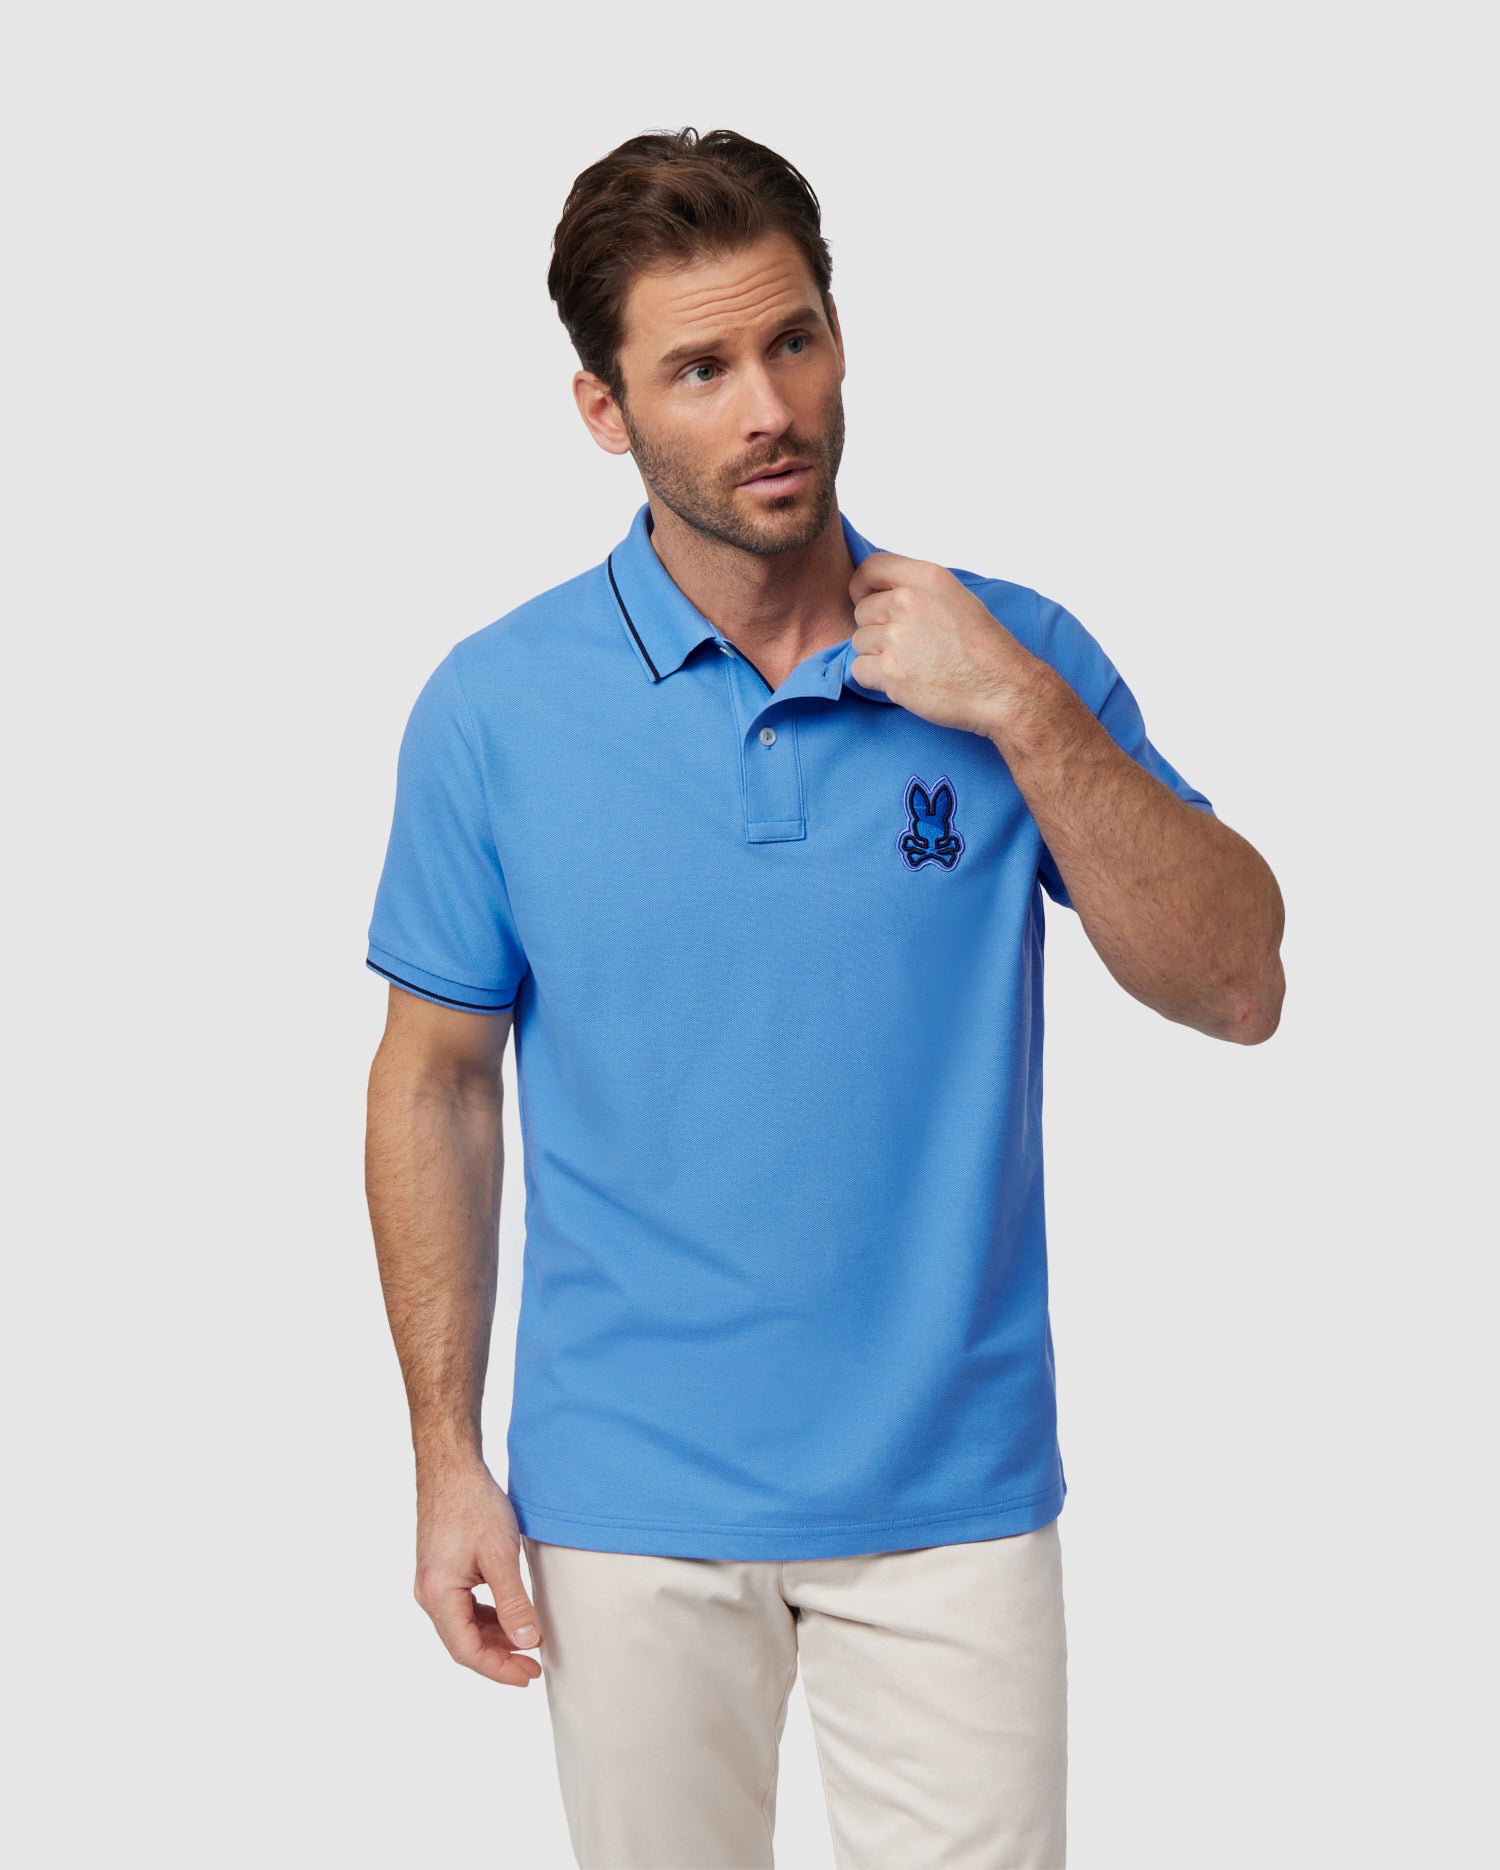 A man with short brown hair is standing against a plain background wearing a light blue Psycho Bunny MENS LENOX PIQUE POLO SHIRT - B6K138B200 made of soft Pima cotton. The shirt features an embroidered Bunny logo on the left chest. He is looking slightly to the side and has one hand near the collar of his shirt, paired with light-colored pants.